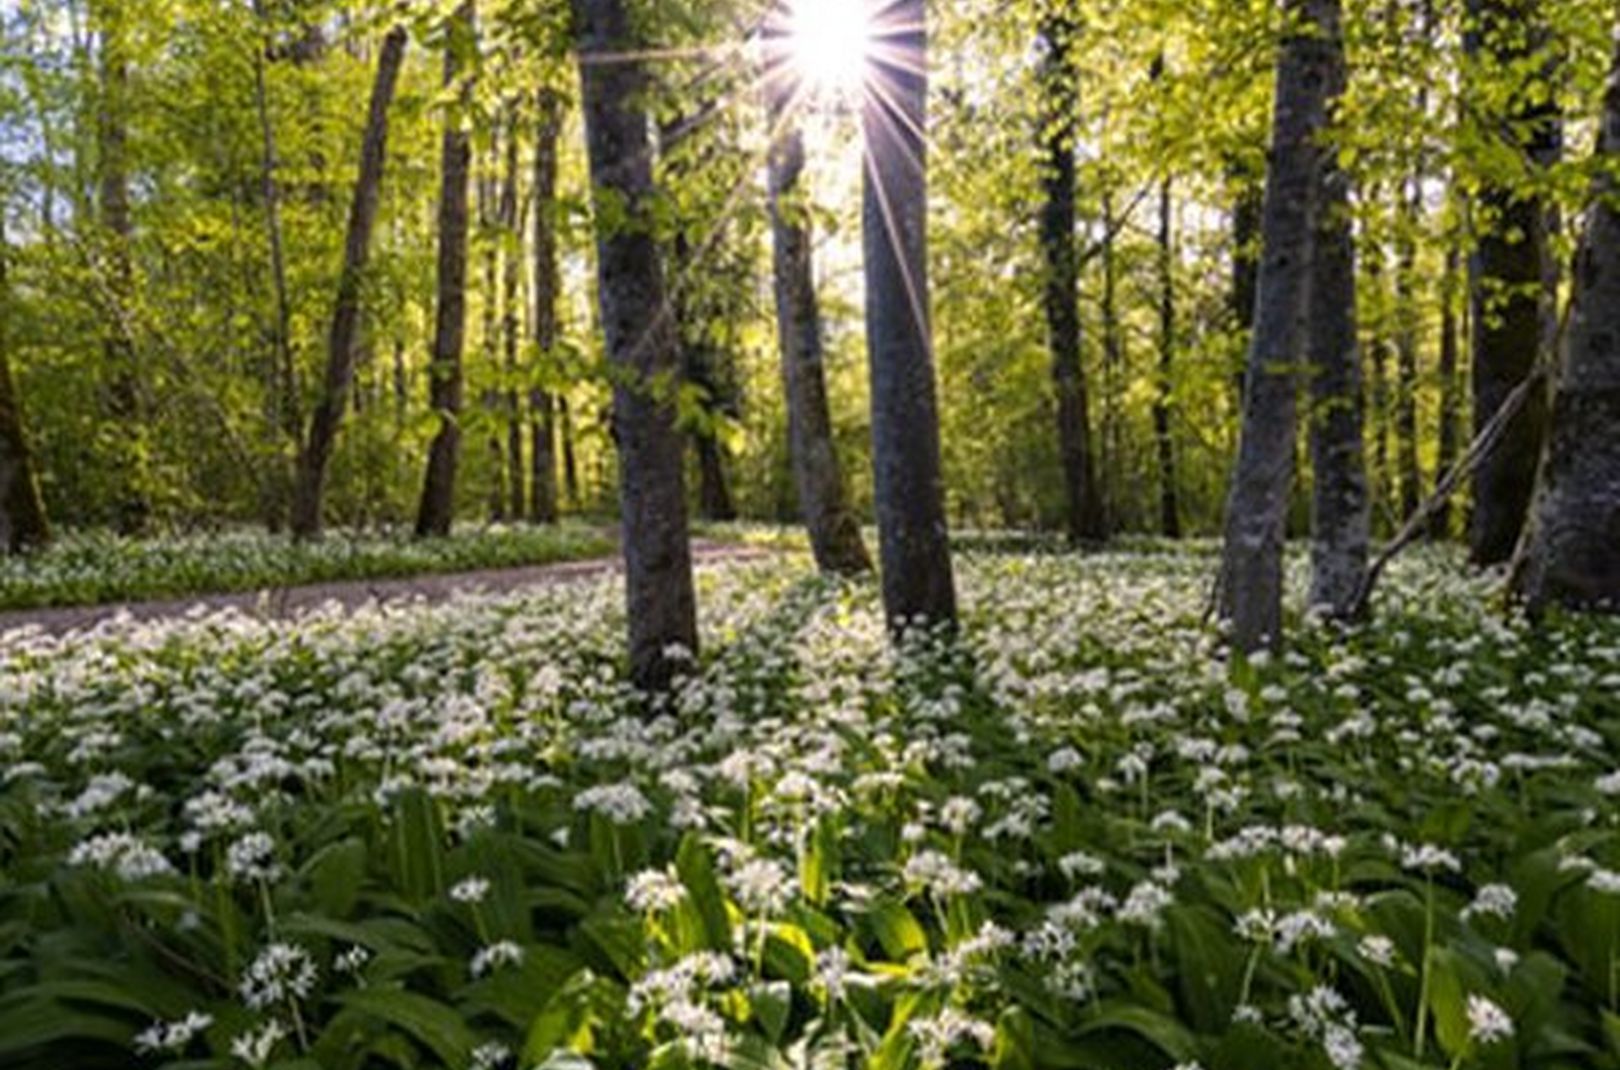 Wild Garlic growing in a woodland in the UK